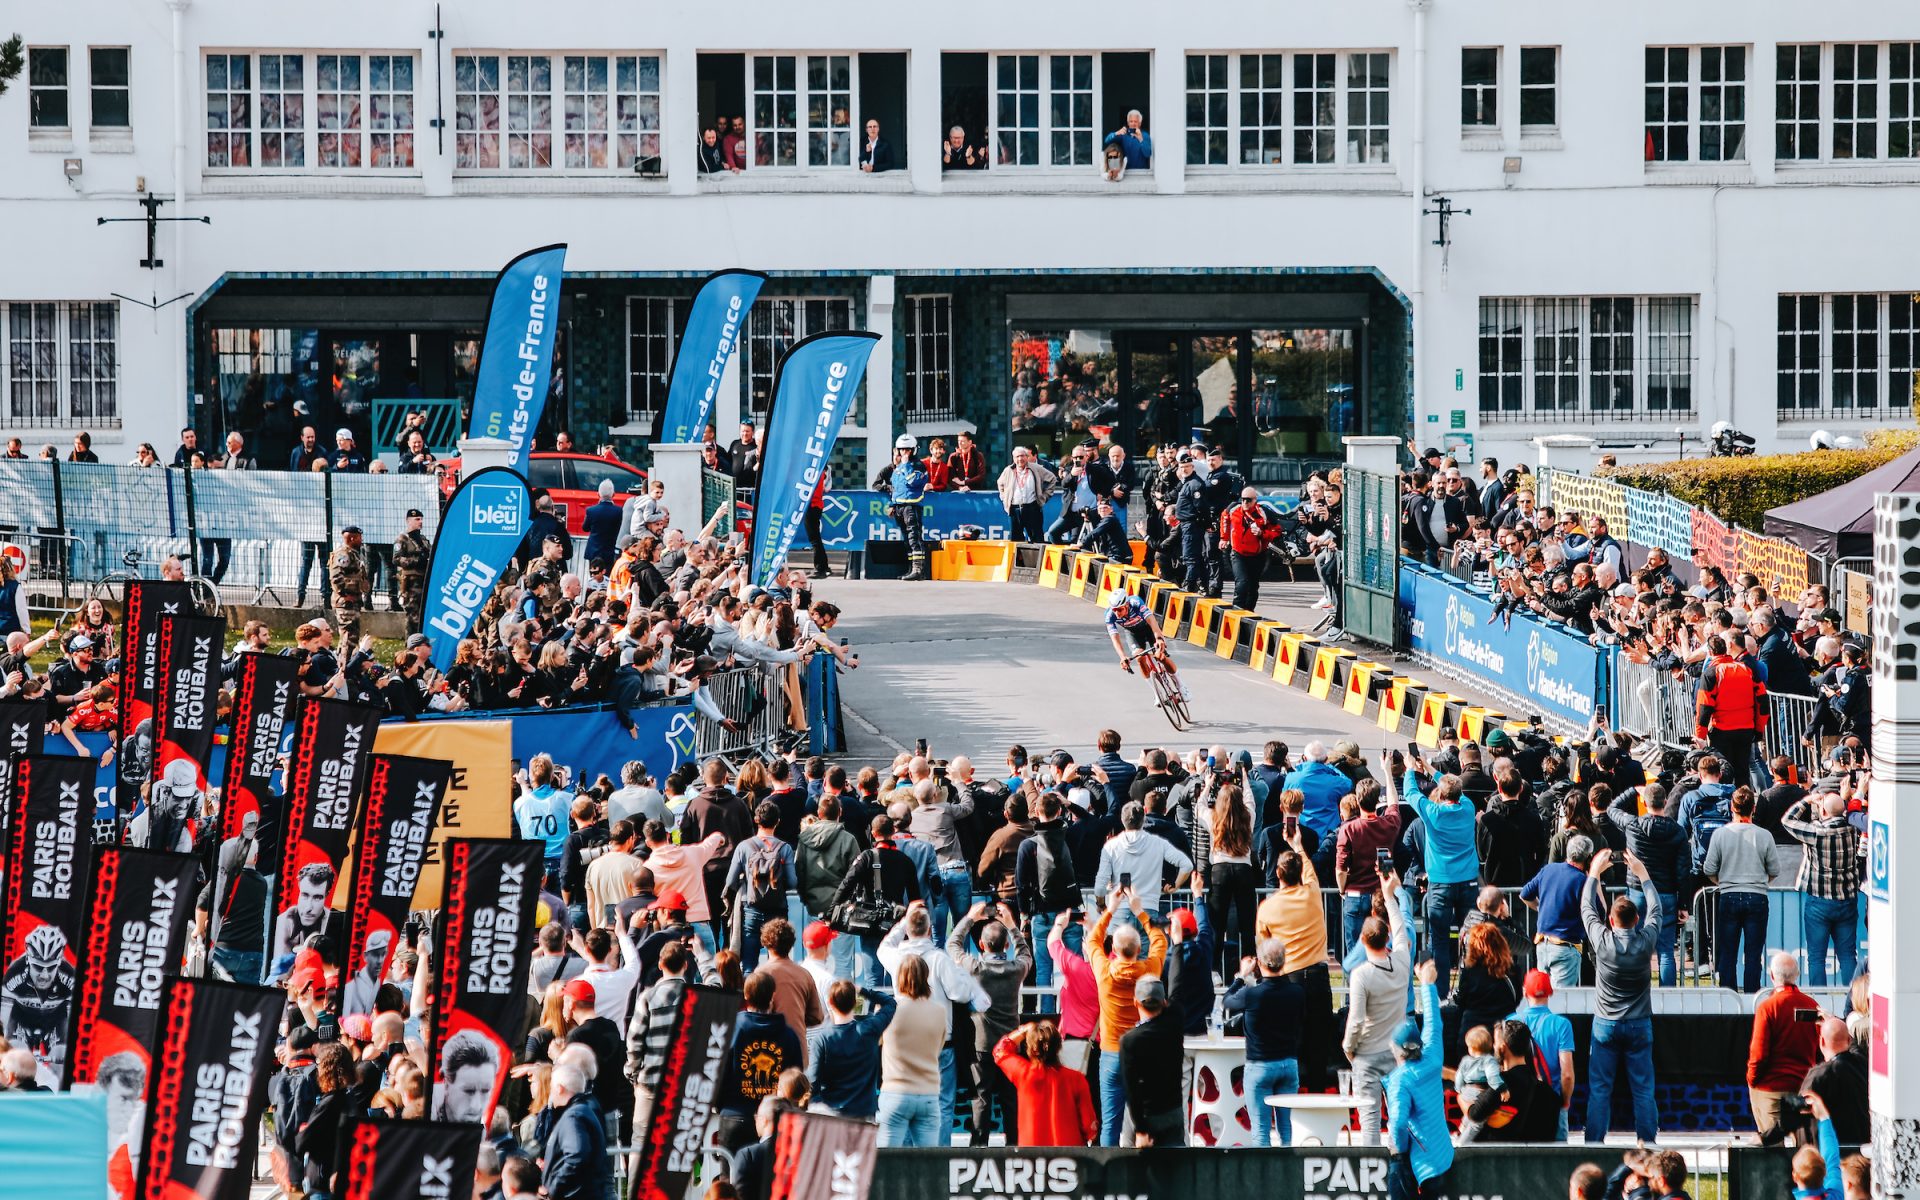 A wide shot of Mathieu van der Peol as he enters the Roubaix Velodrome for the finish. A sea of fans and sponsor banners flank the barriers of the road.